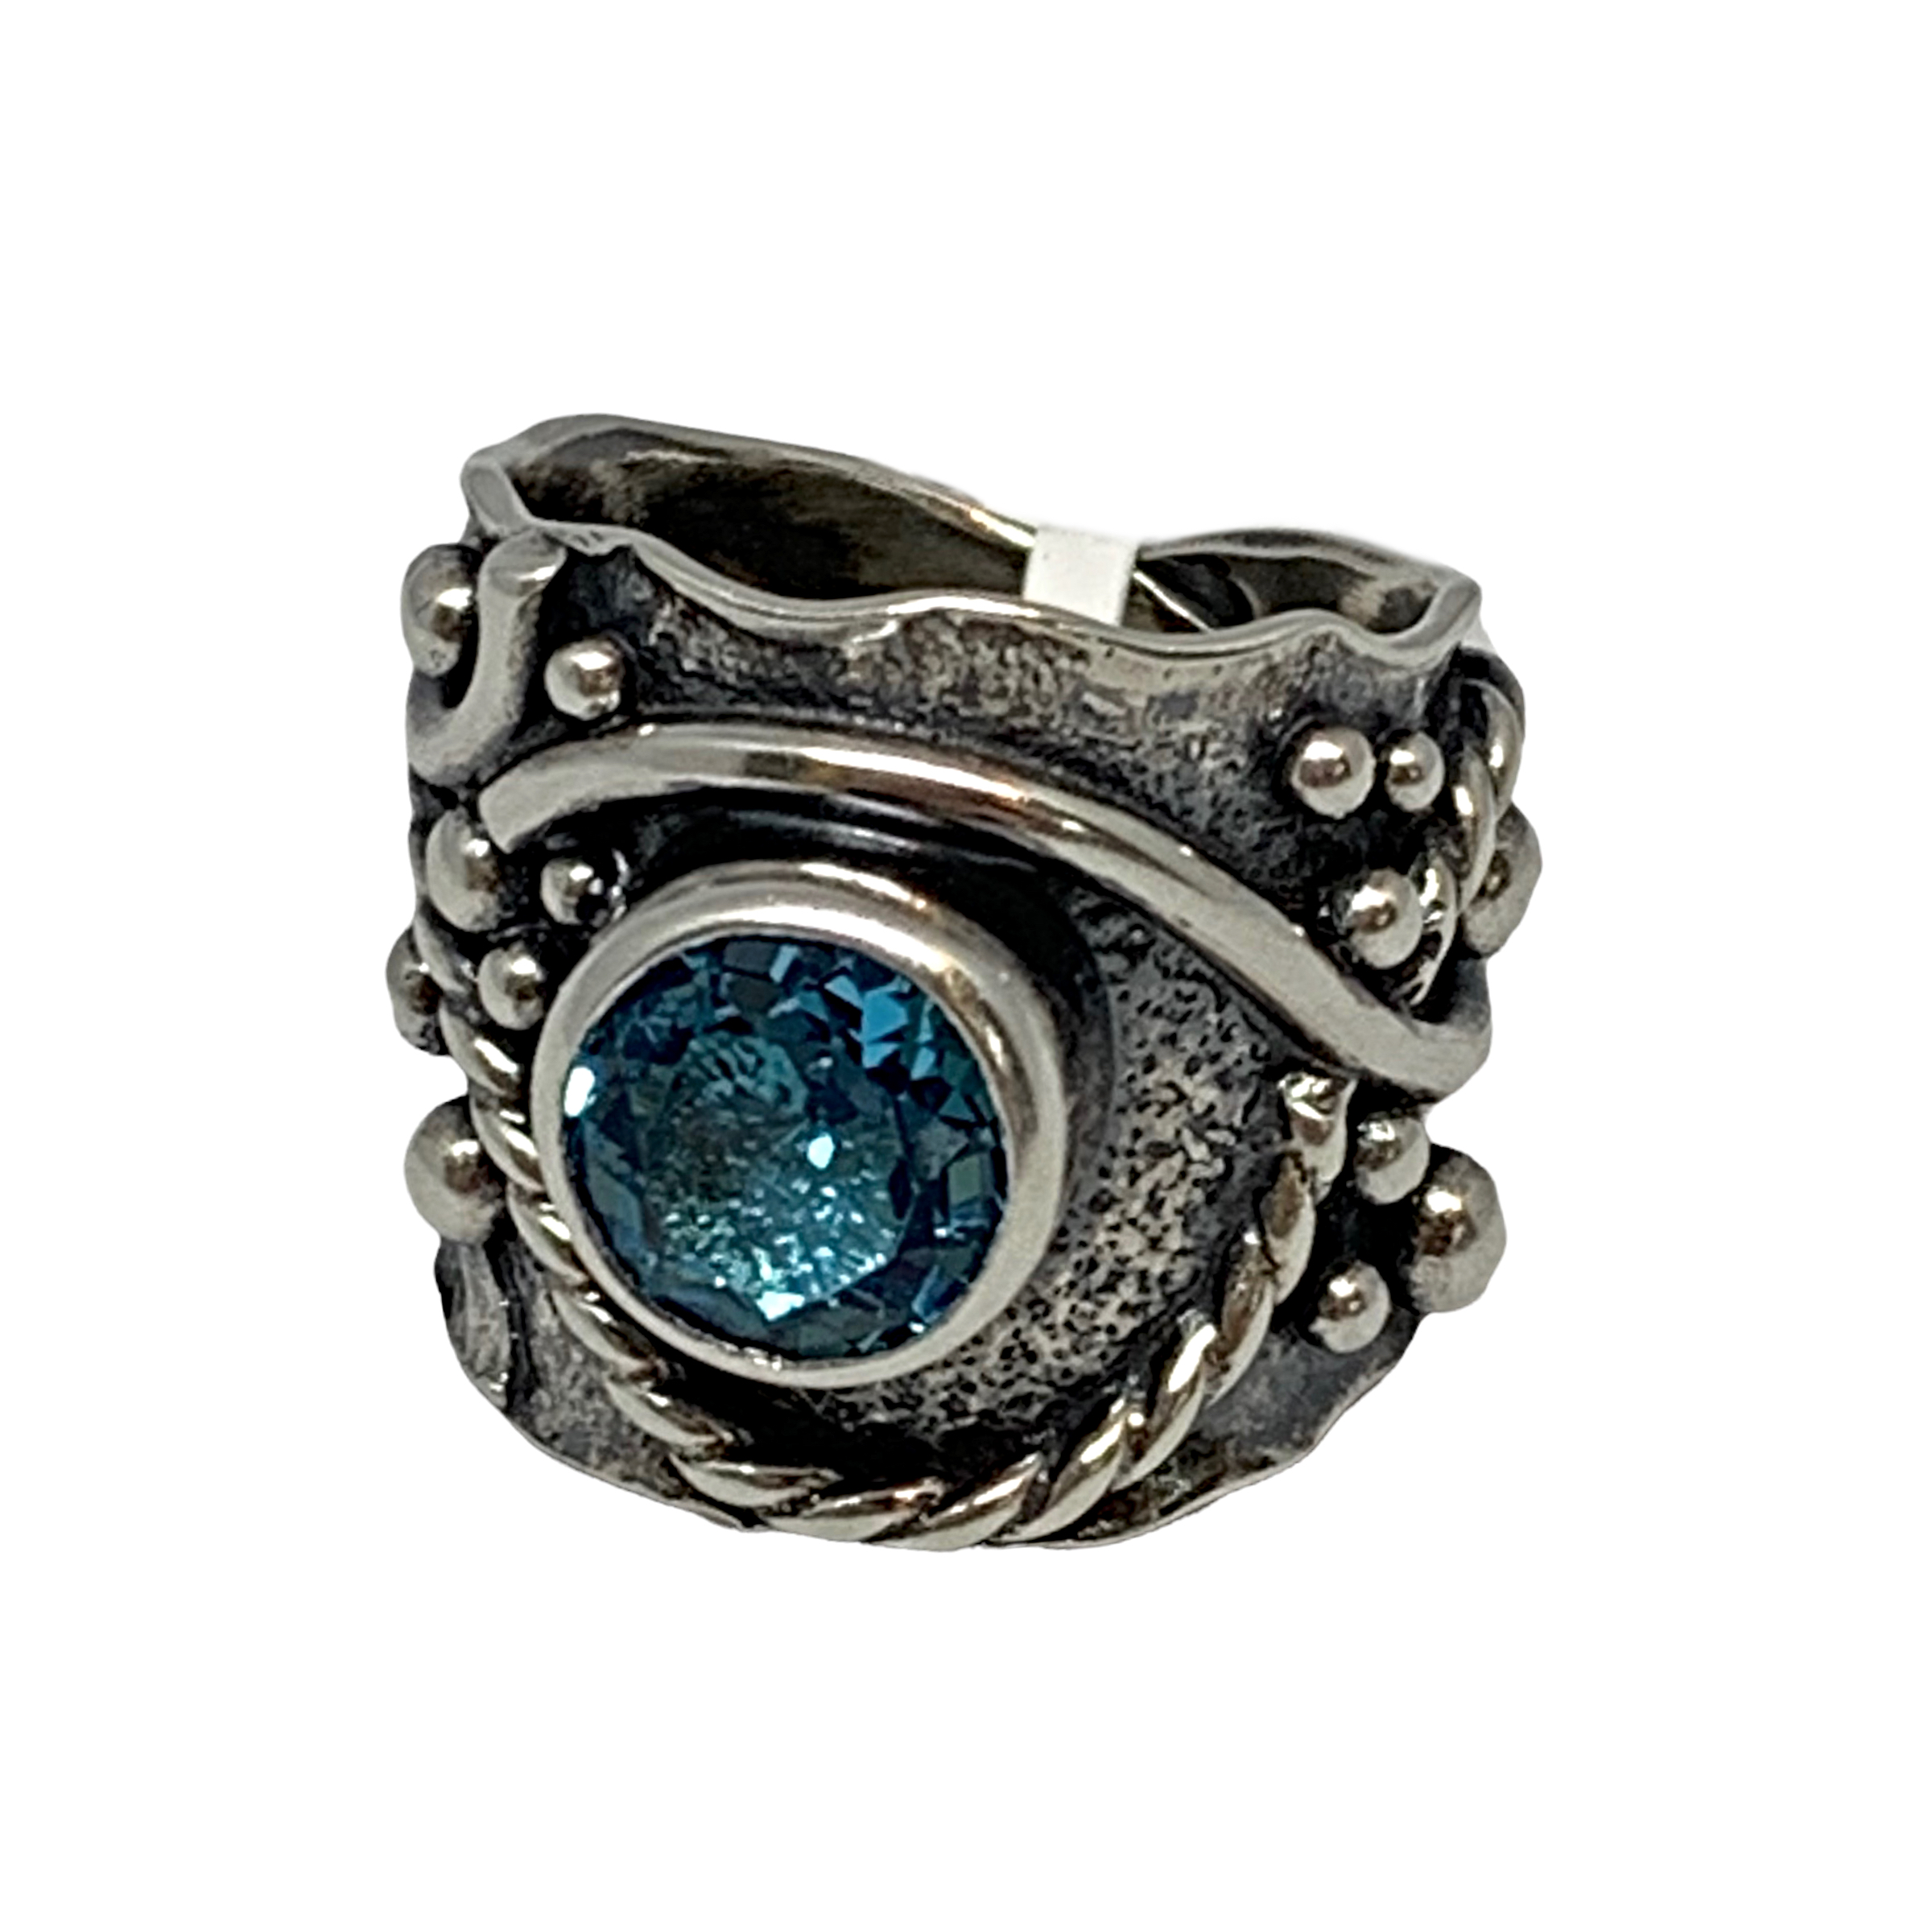 Handmade sterling silver + Swiss blue topaz ring by A&R Jewellery | Effusion Art Gallery + Cast Glass Studio, Invermere BC